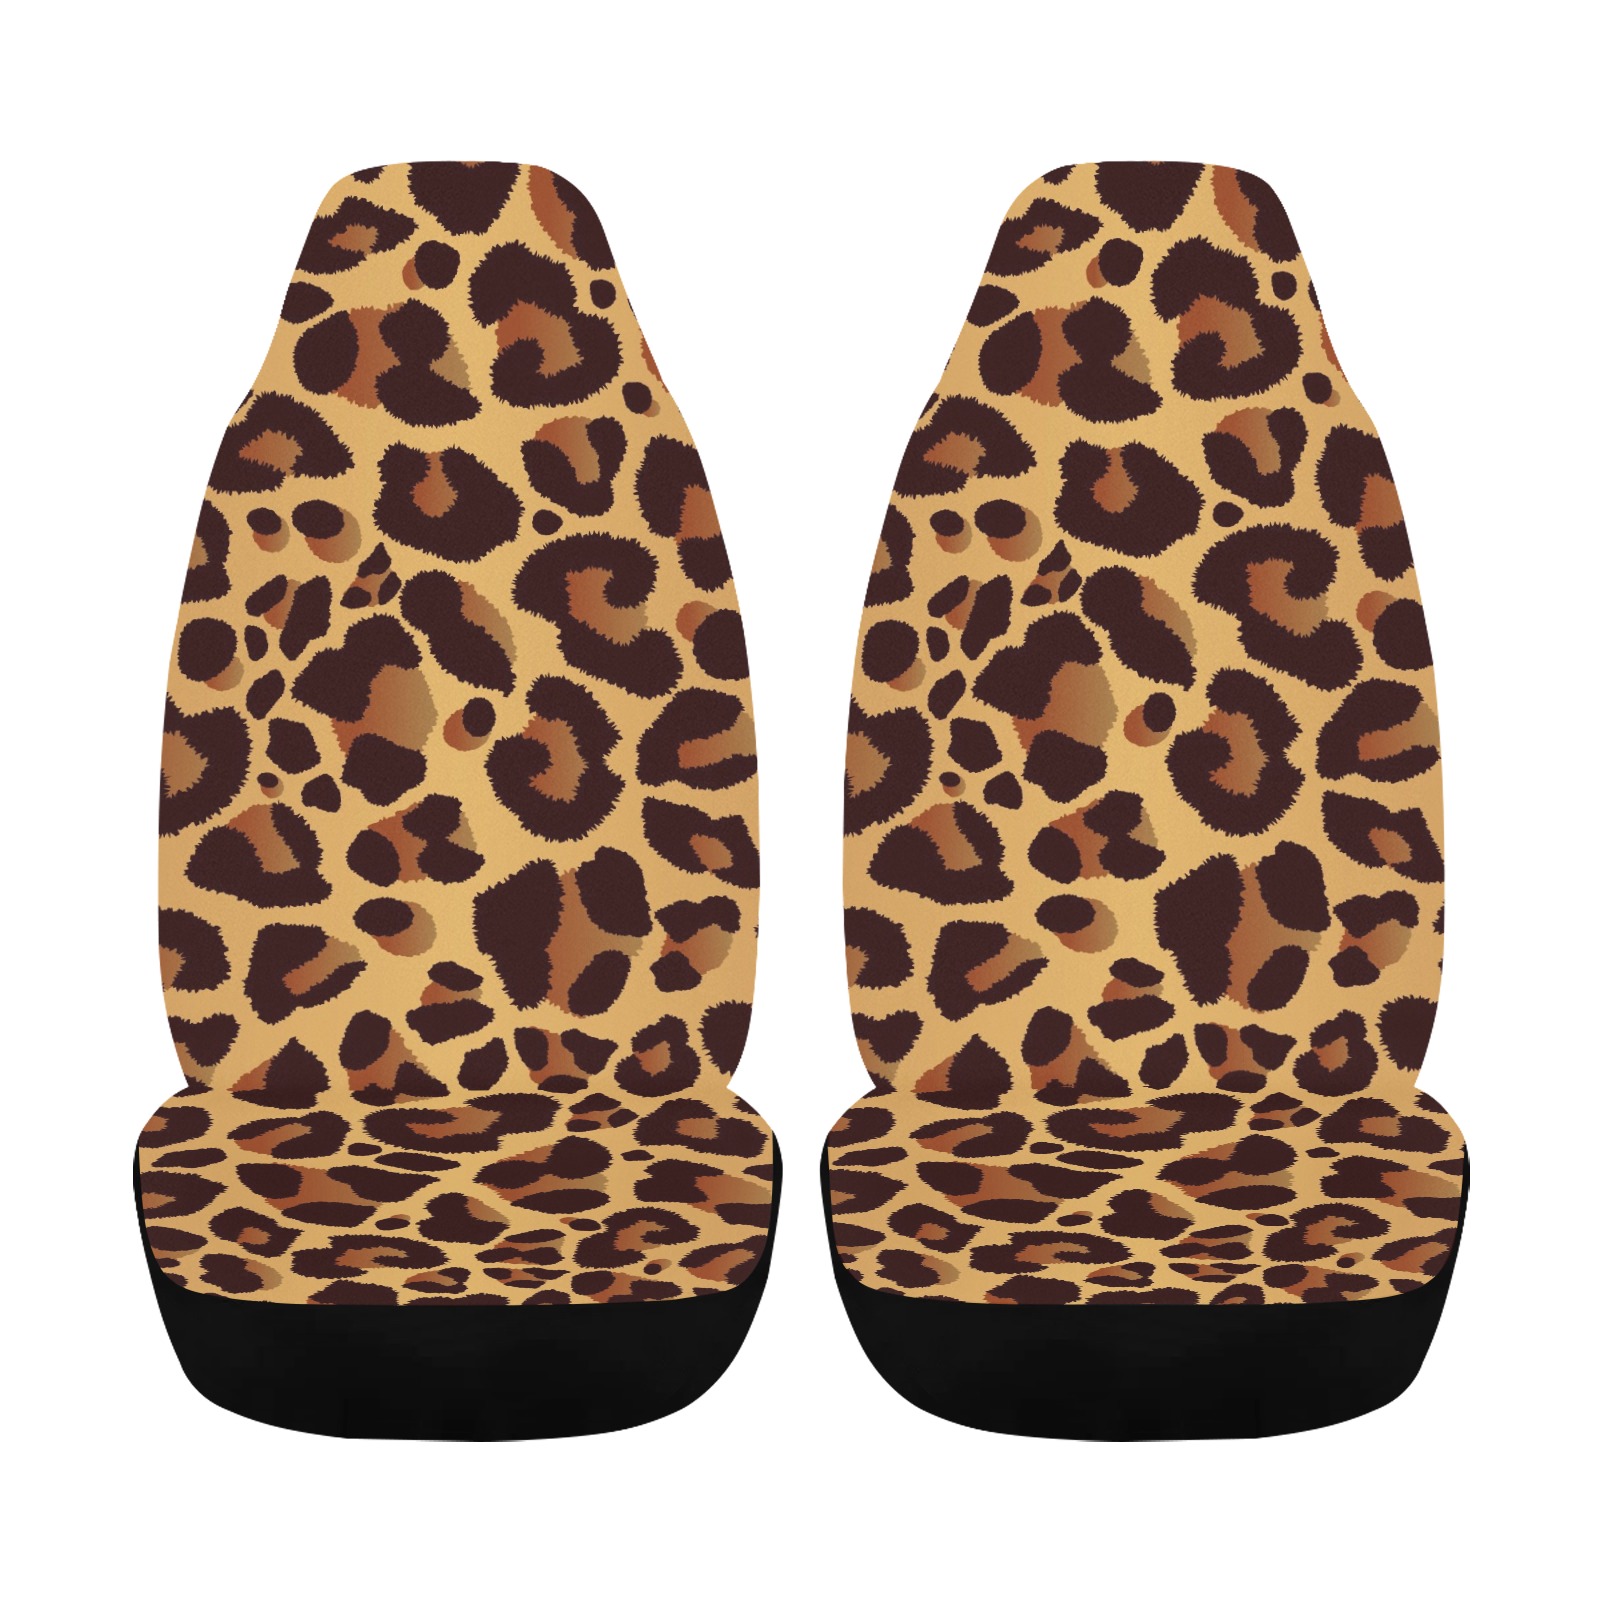 Spots Car Seat Cover Airbag Compatible (Set of 2)